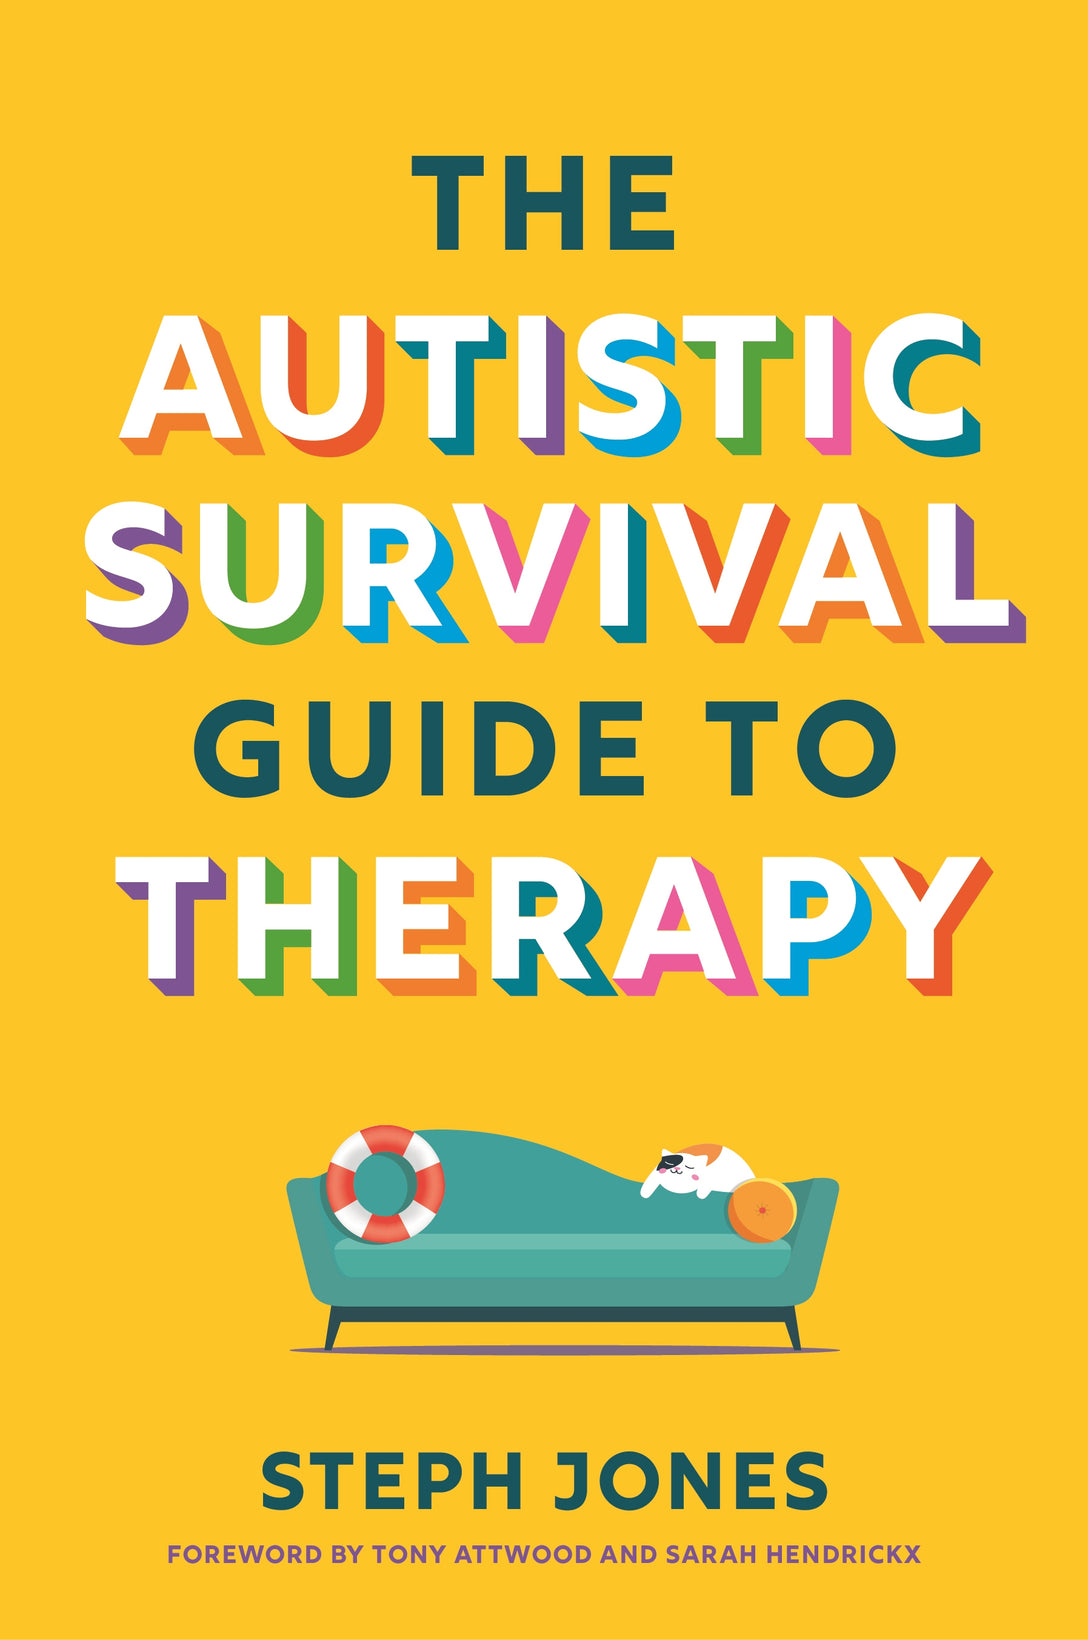 The Autistic Survival Guide to Therapy by Steph Jones